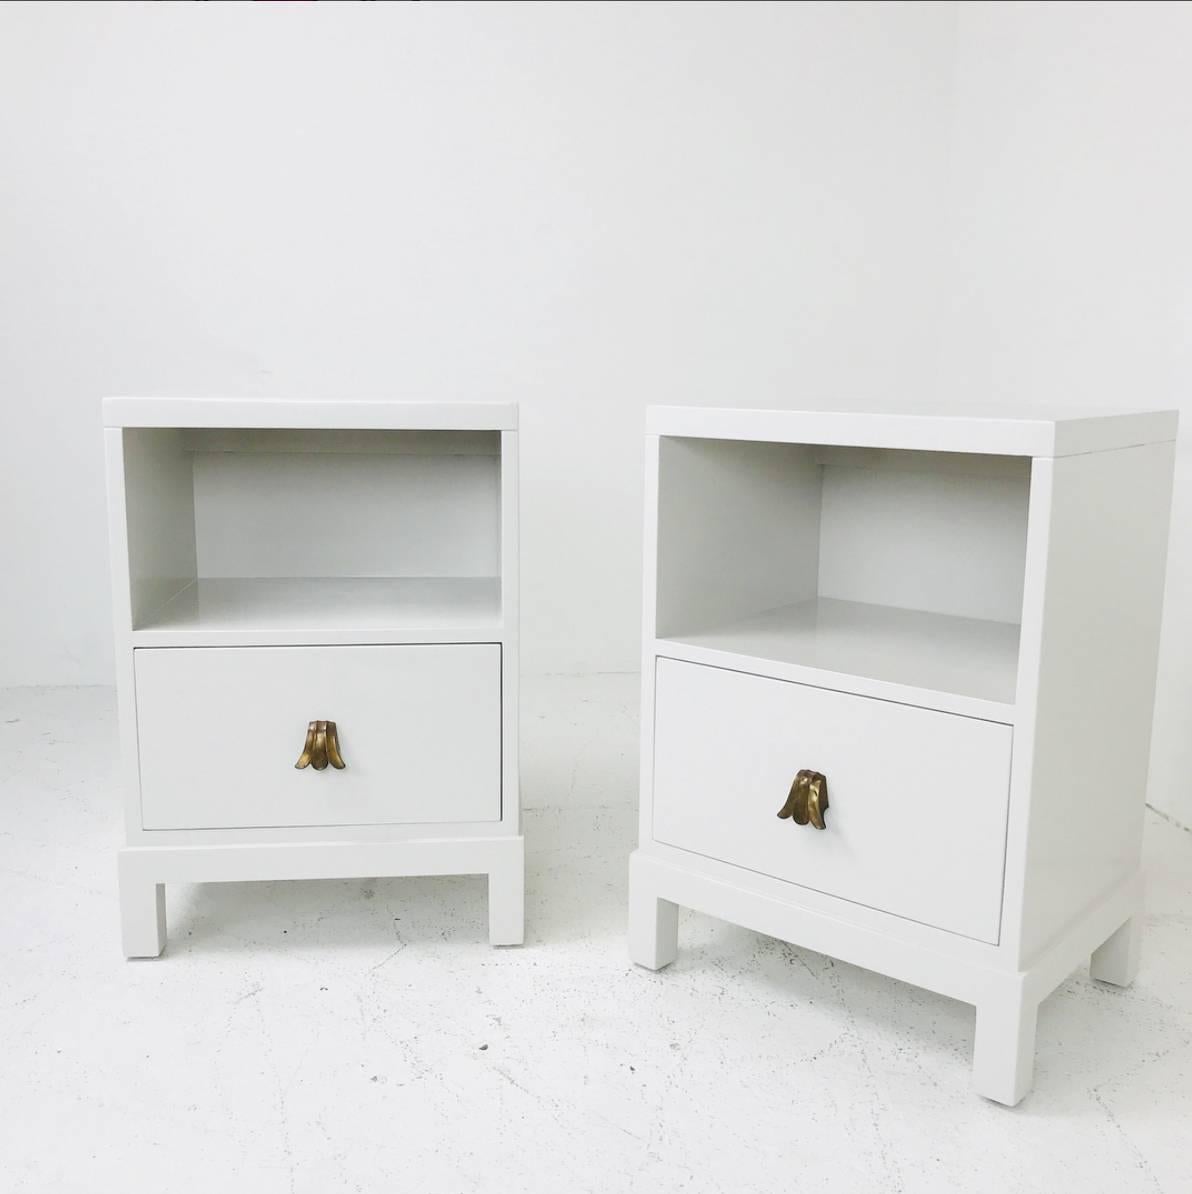 Pair of lacquered nightstands/side tables by Widdicomb. Newly refinished in a soft light gray lacquer.

dimensions: 18.5